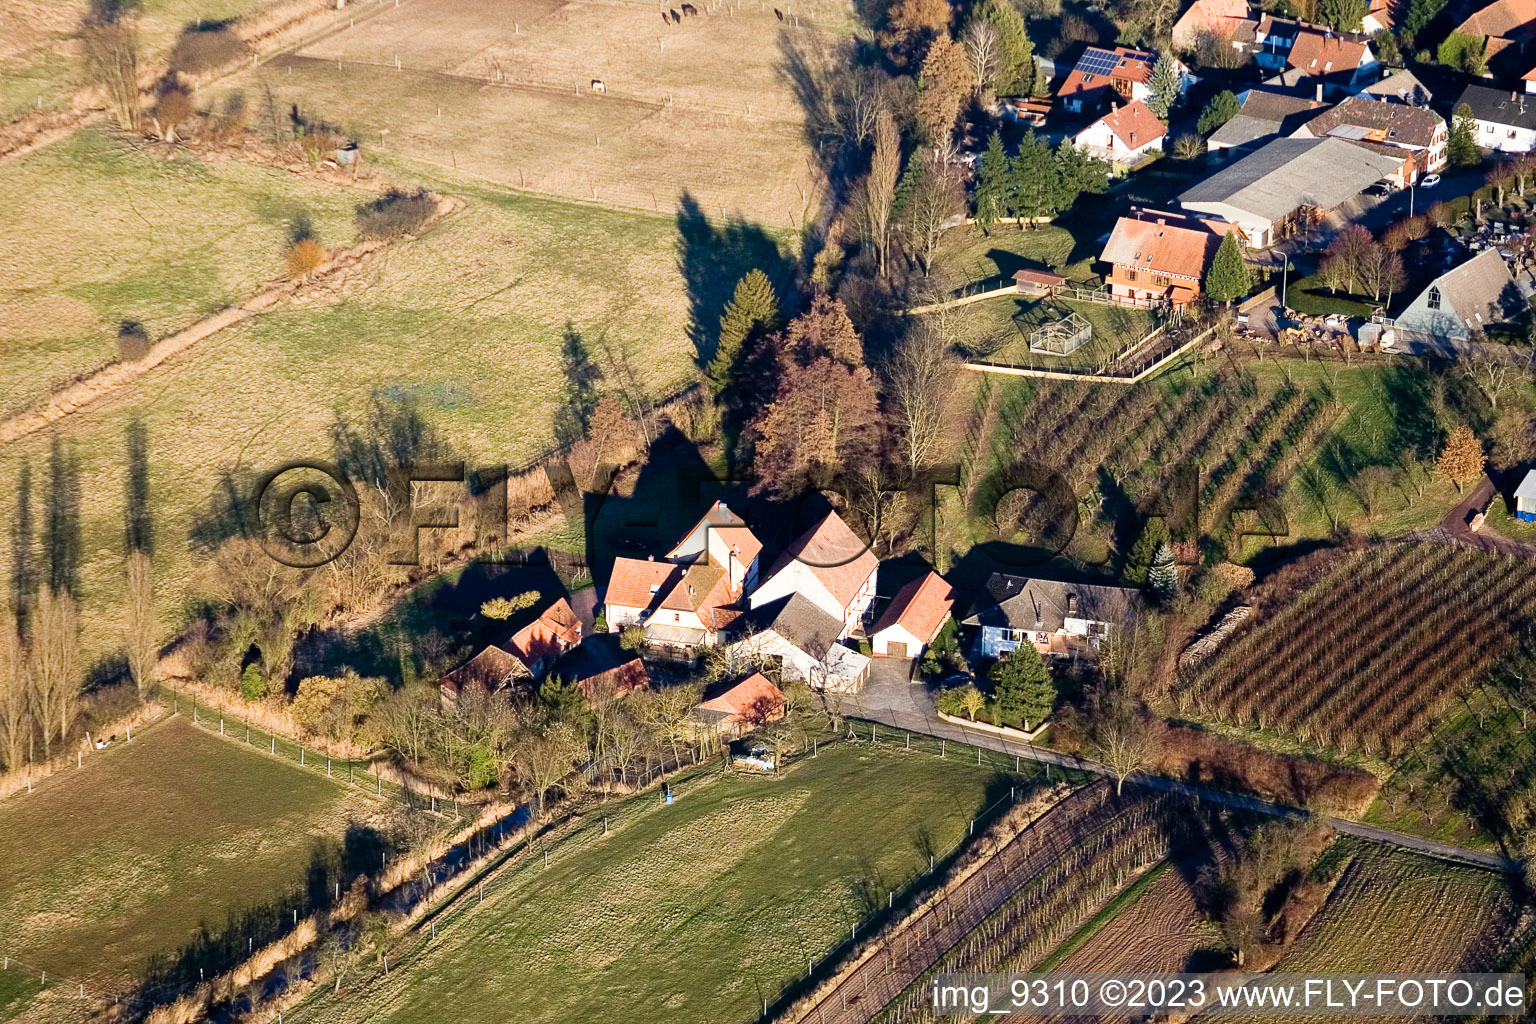 Bird's eye view of Winden mill in Winden in the state Rhineland-Palatinate, Germany